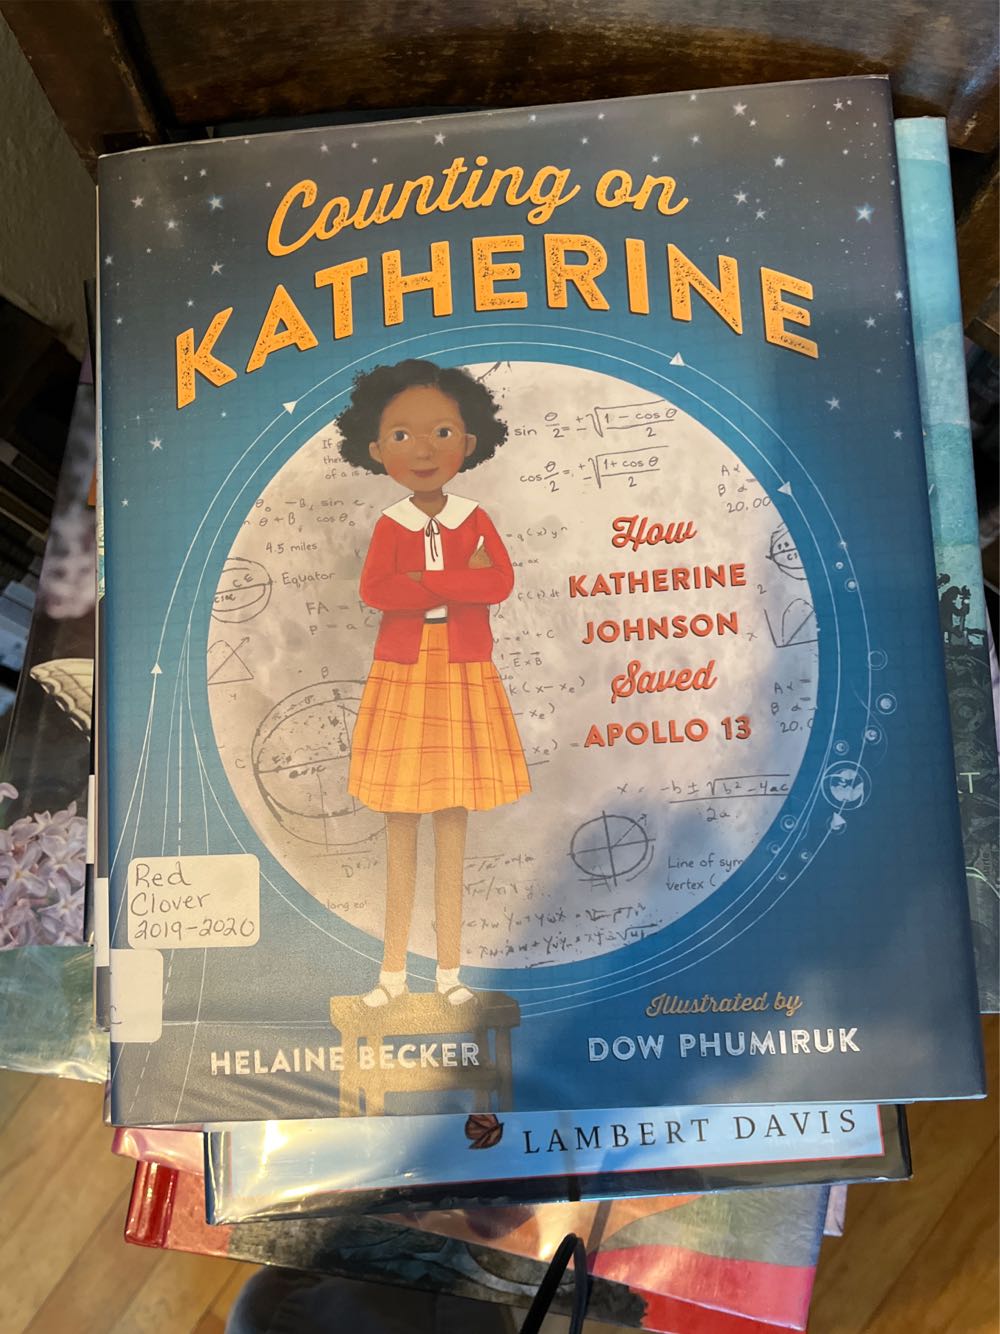 Counting On Katherine: How Katherine Johnson Saved Apollo 13 - Helaine Becker (Henry Holt and Company - Hardcover) book collectible [Barcode 9781250137524] - Main Image 1